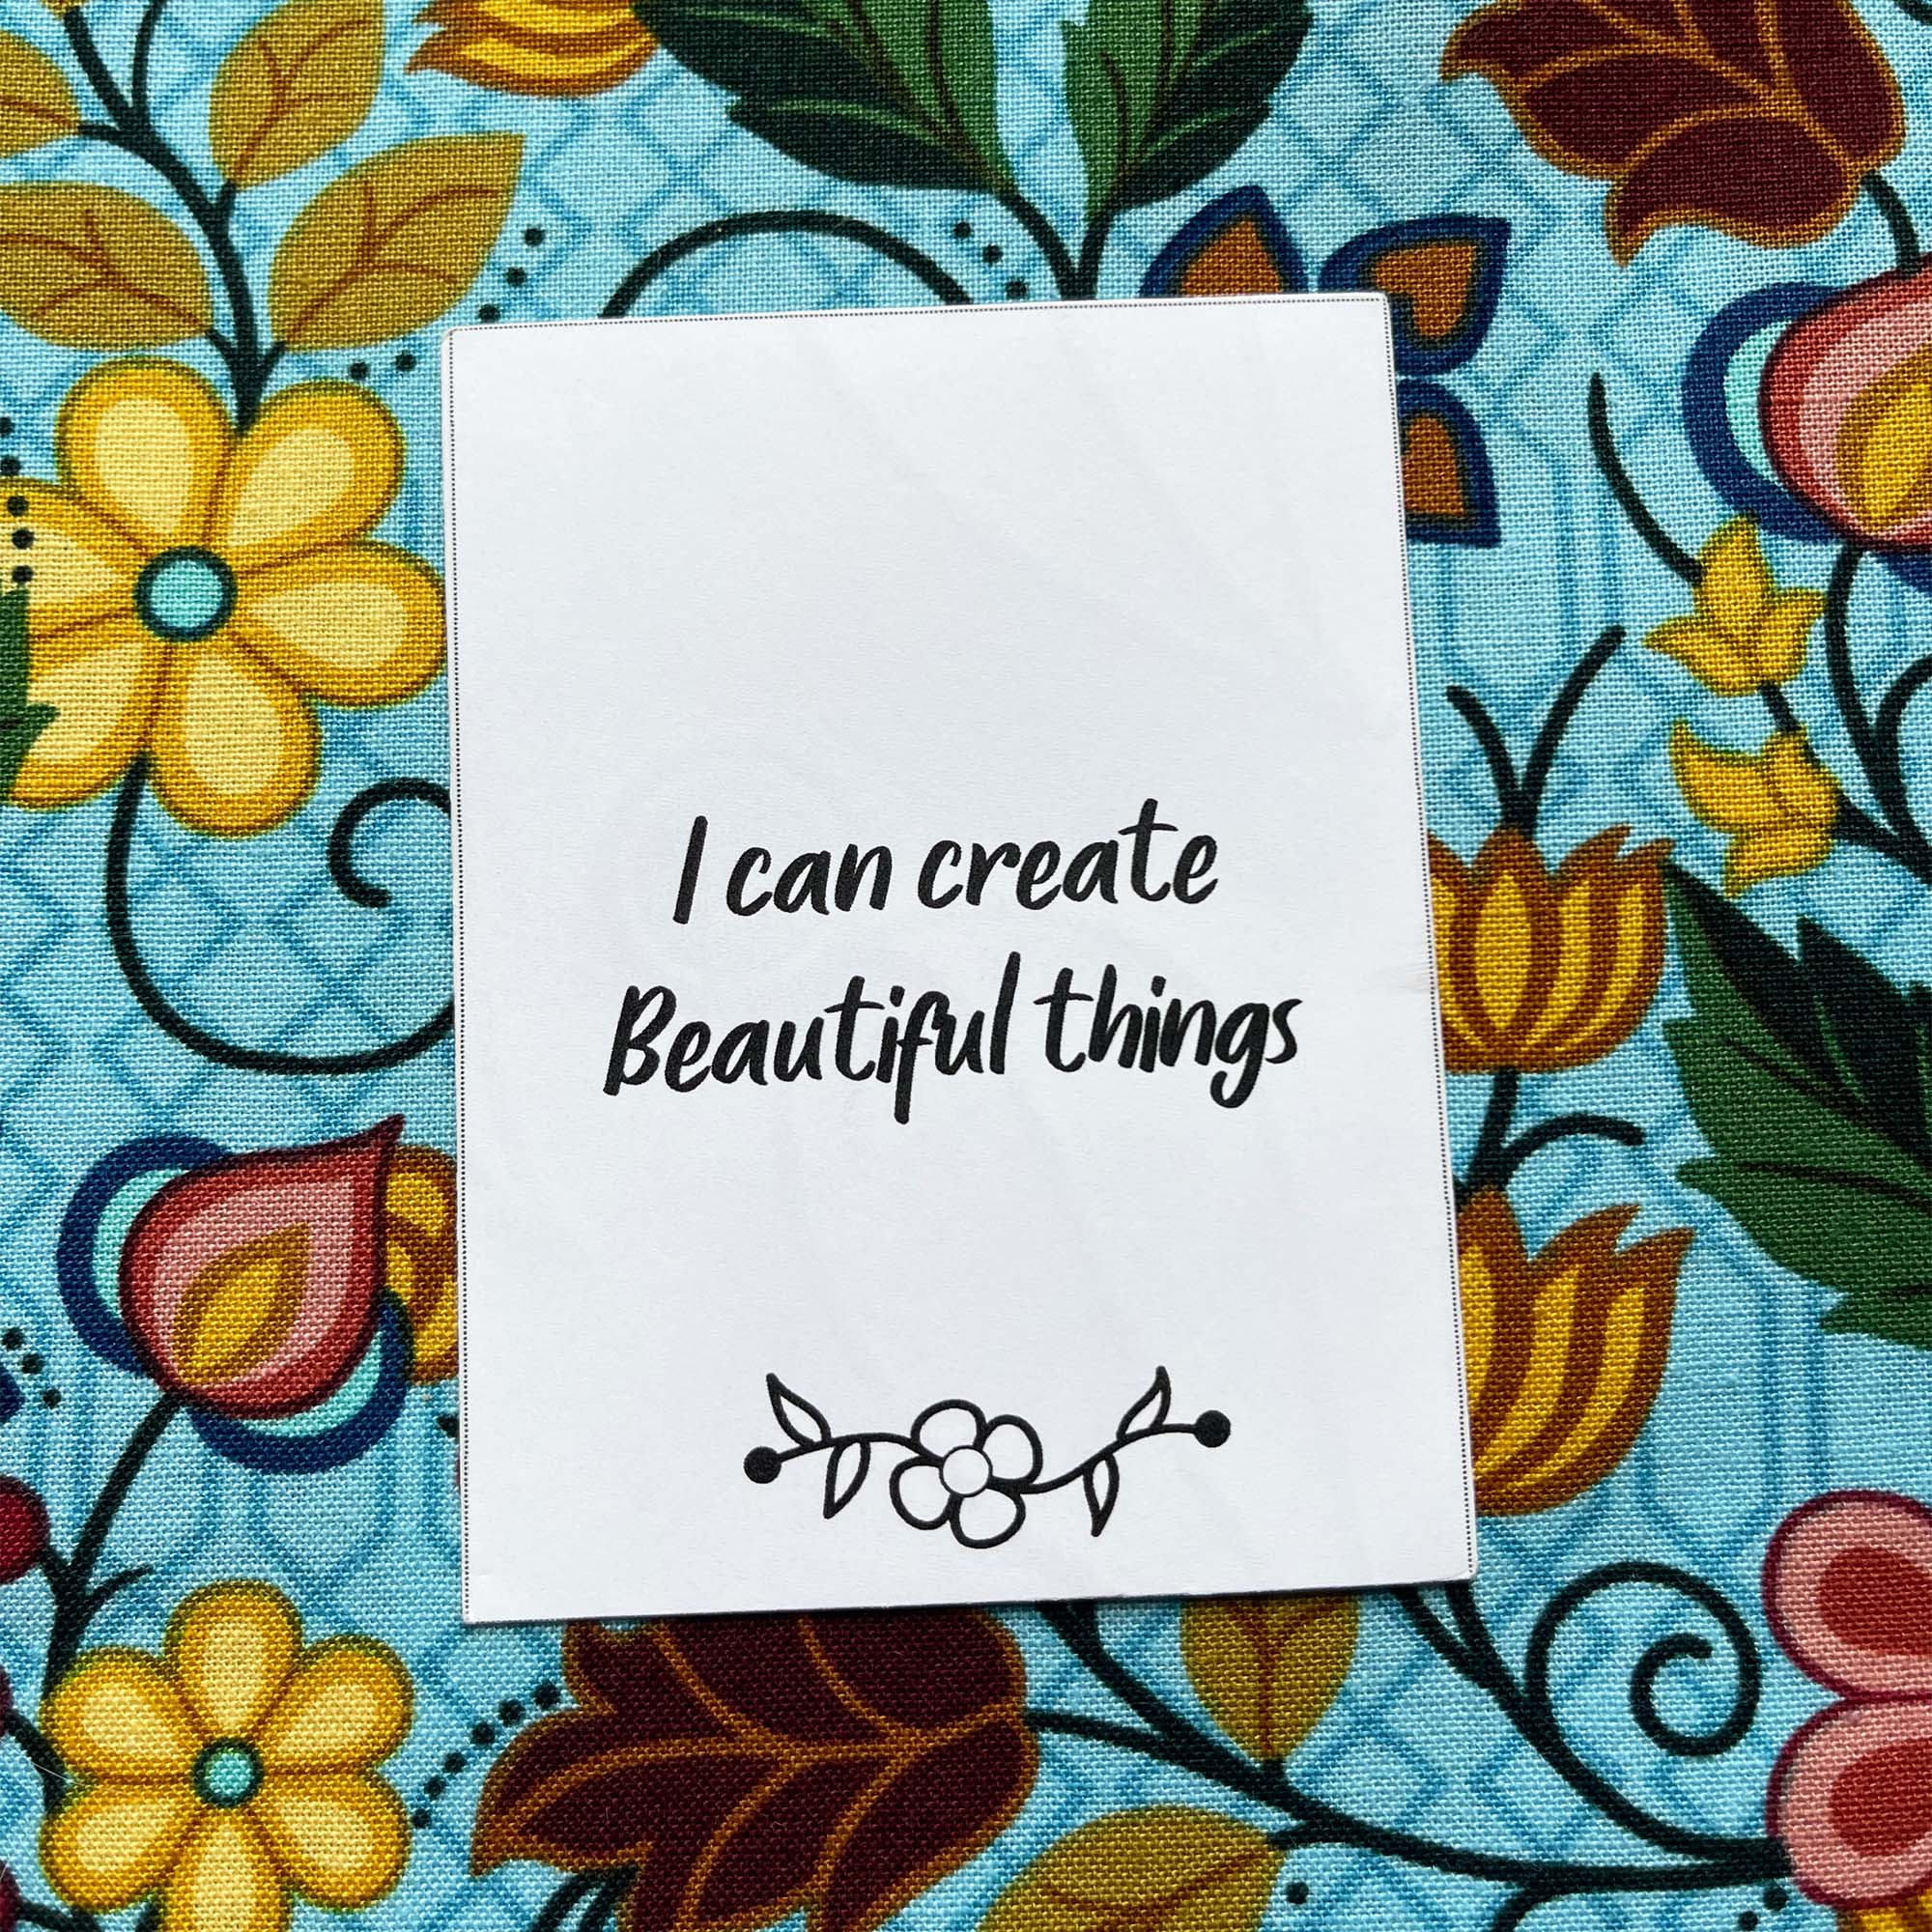 A card stating "I can create beautiful things" on a floral fabric background